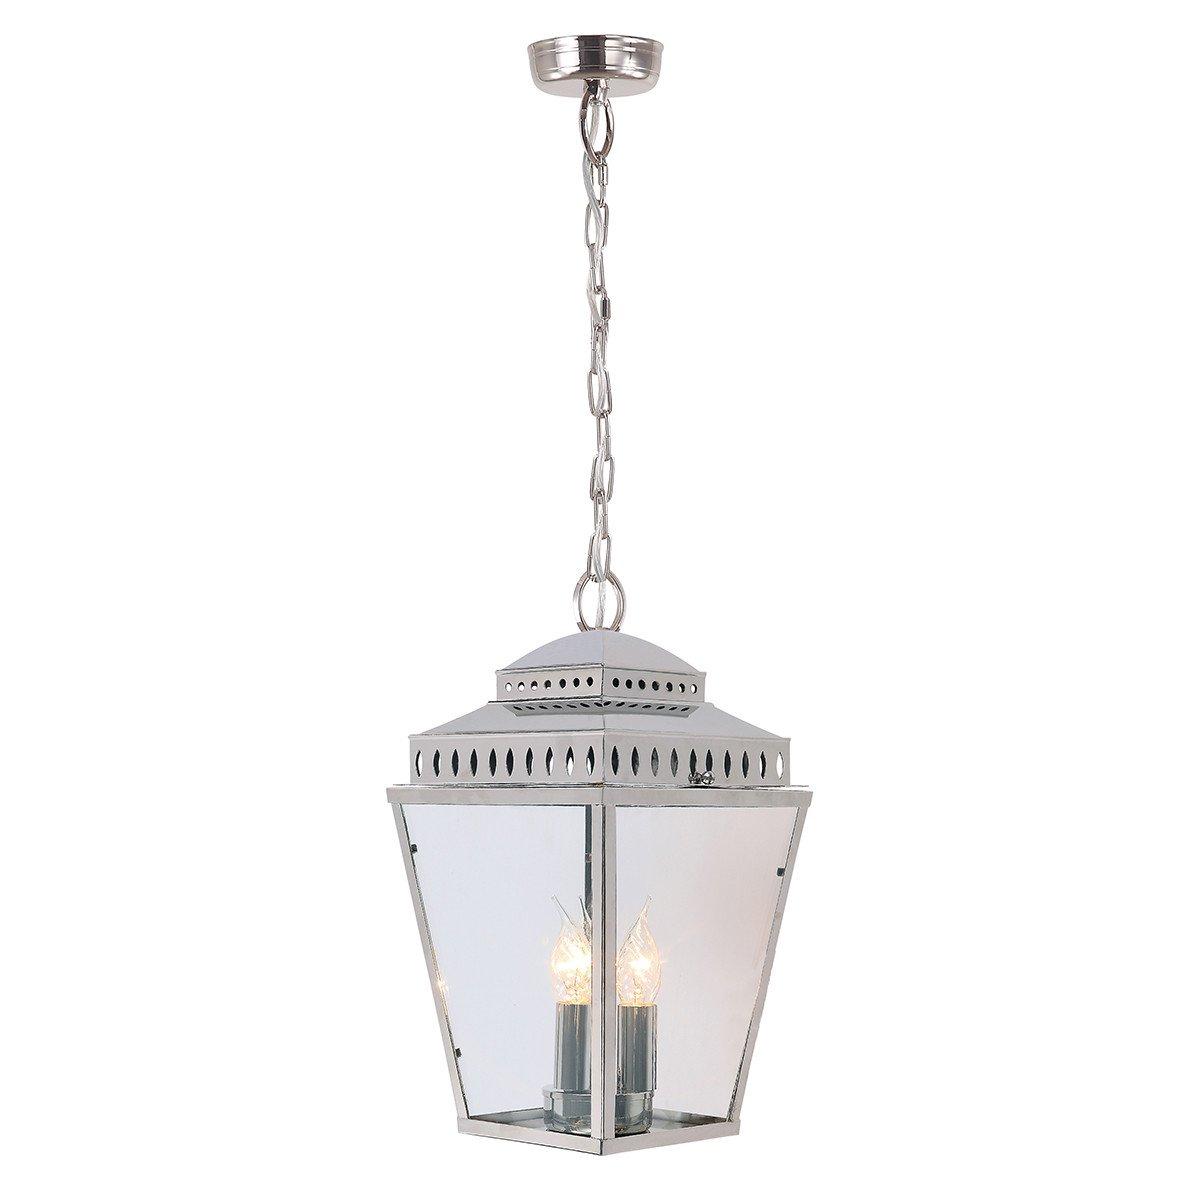 Mansion House 3 Light Outdoor Ceiling Chain Lantern Polished Nickel IP44 E14